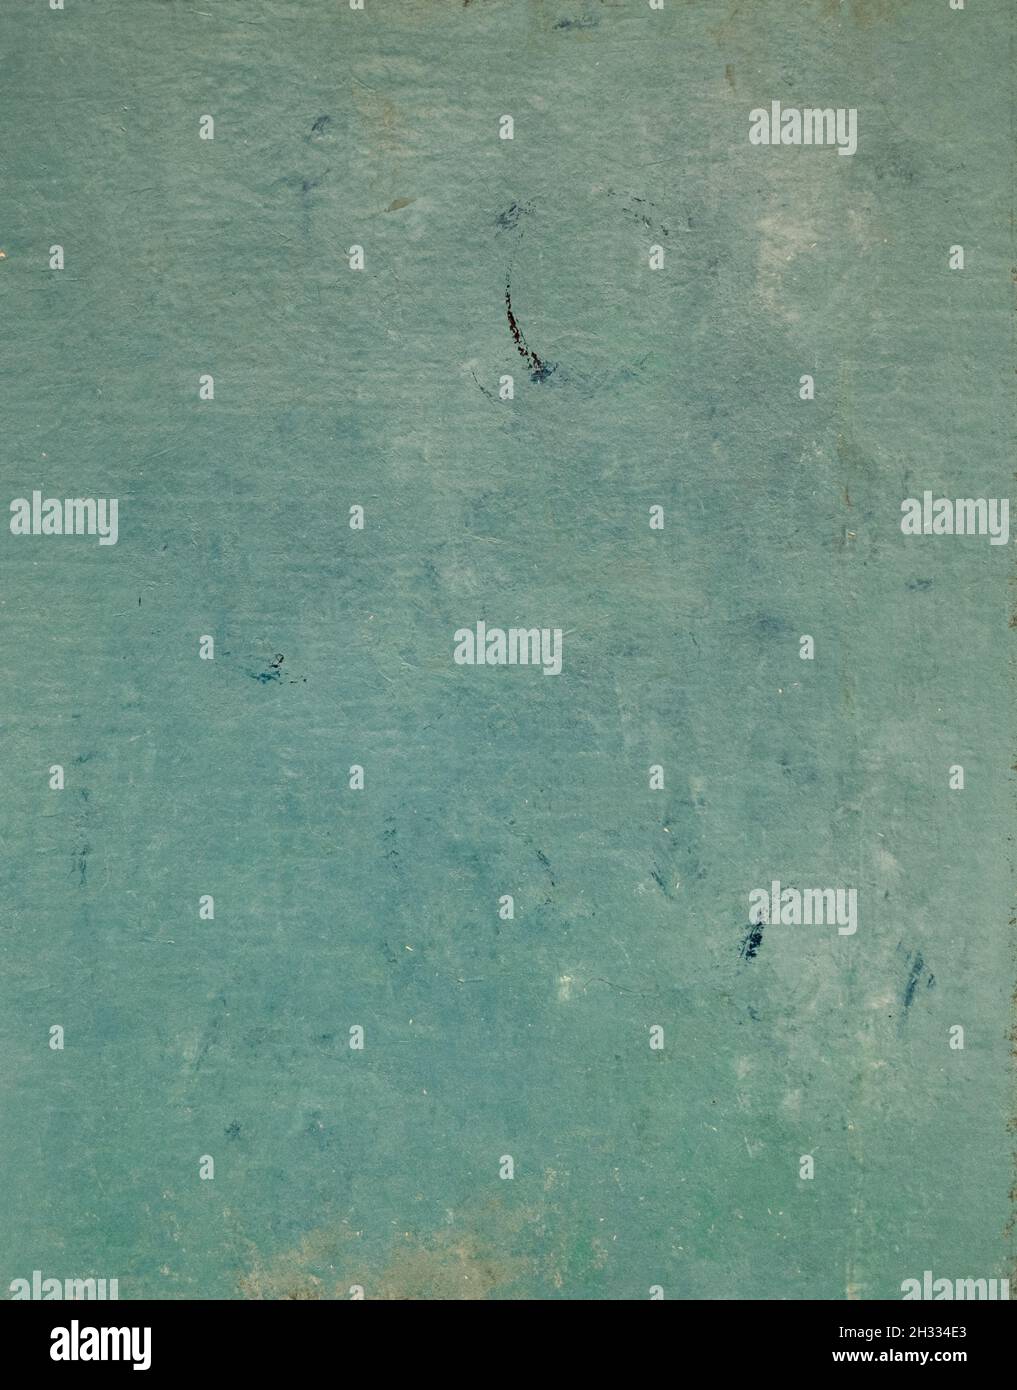 Abstract background of paper sheet painted in aquamarine color with traces of blue paint Stock Photo